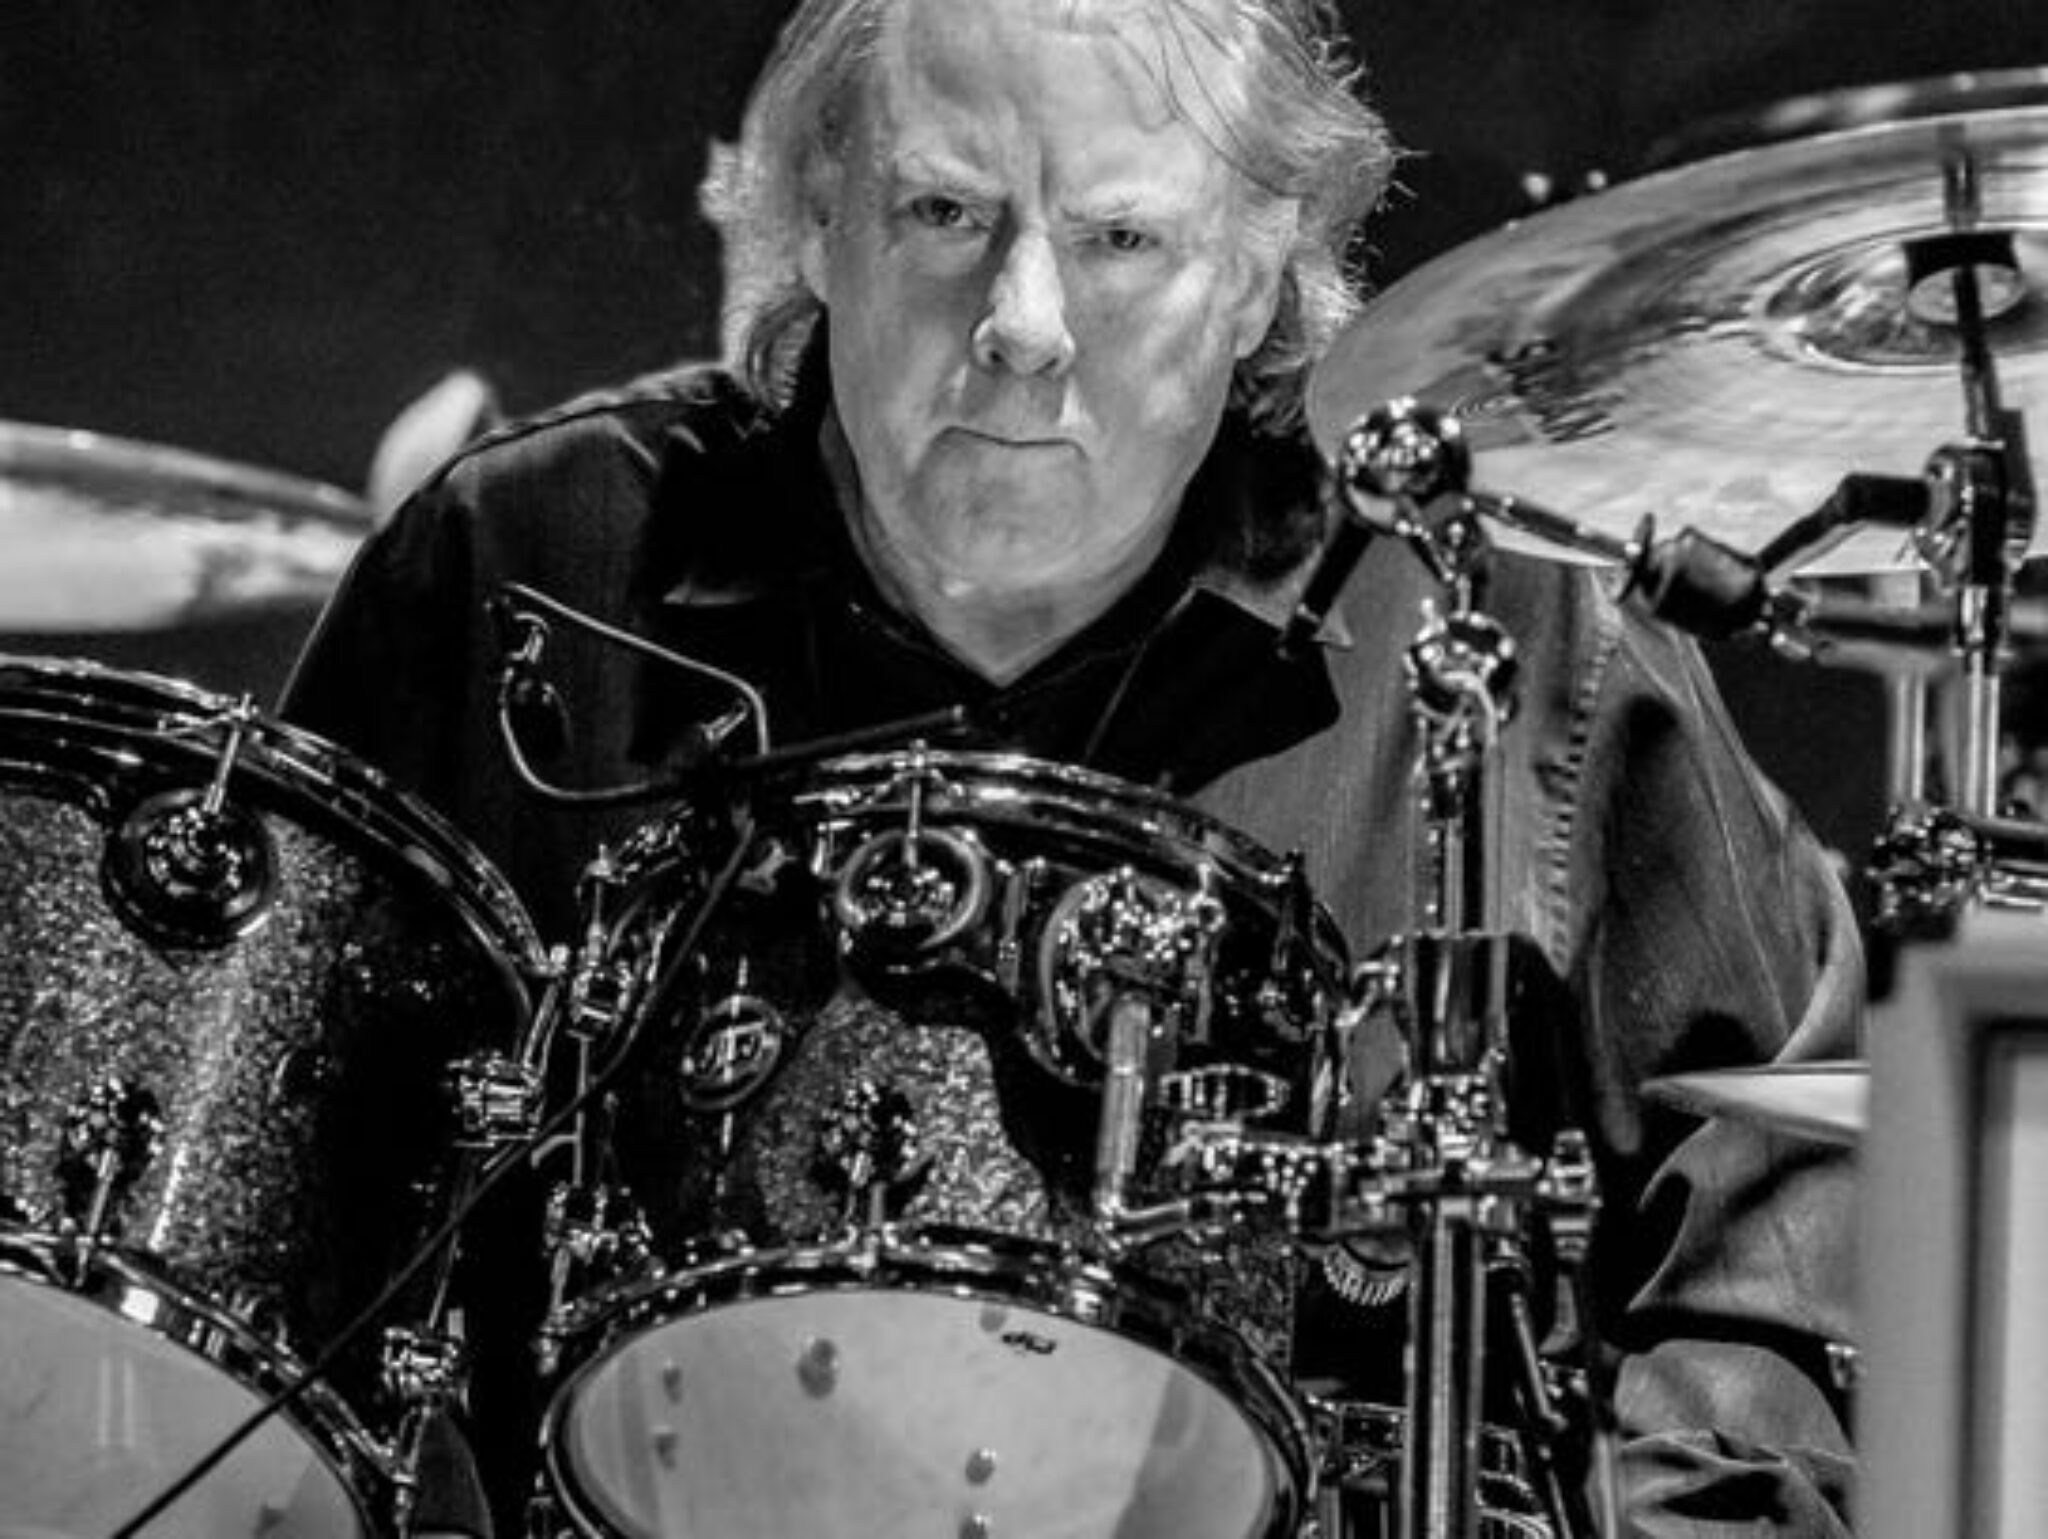 Drummer for Santana - Full Lineup Over the Years - Drum That